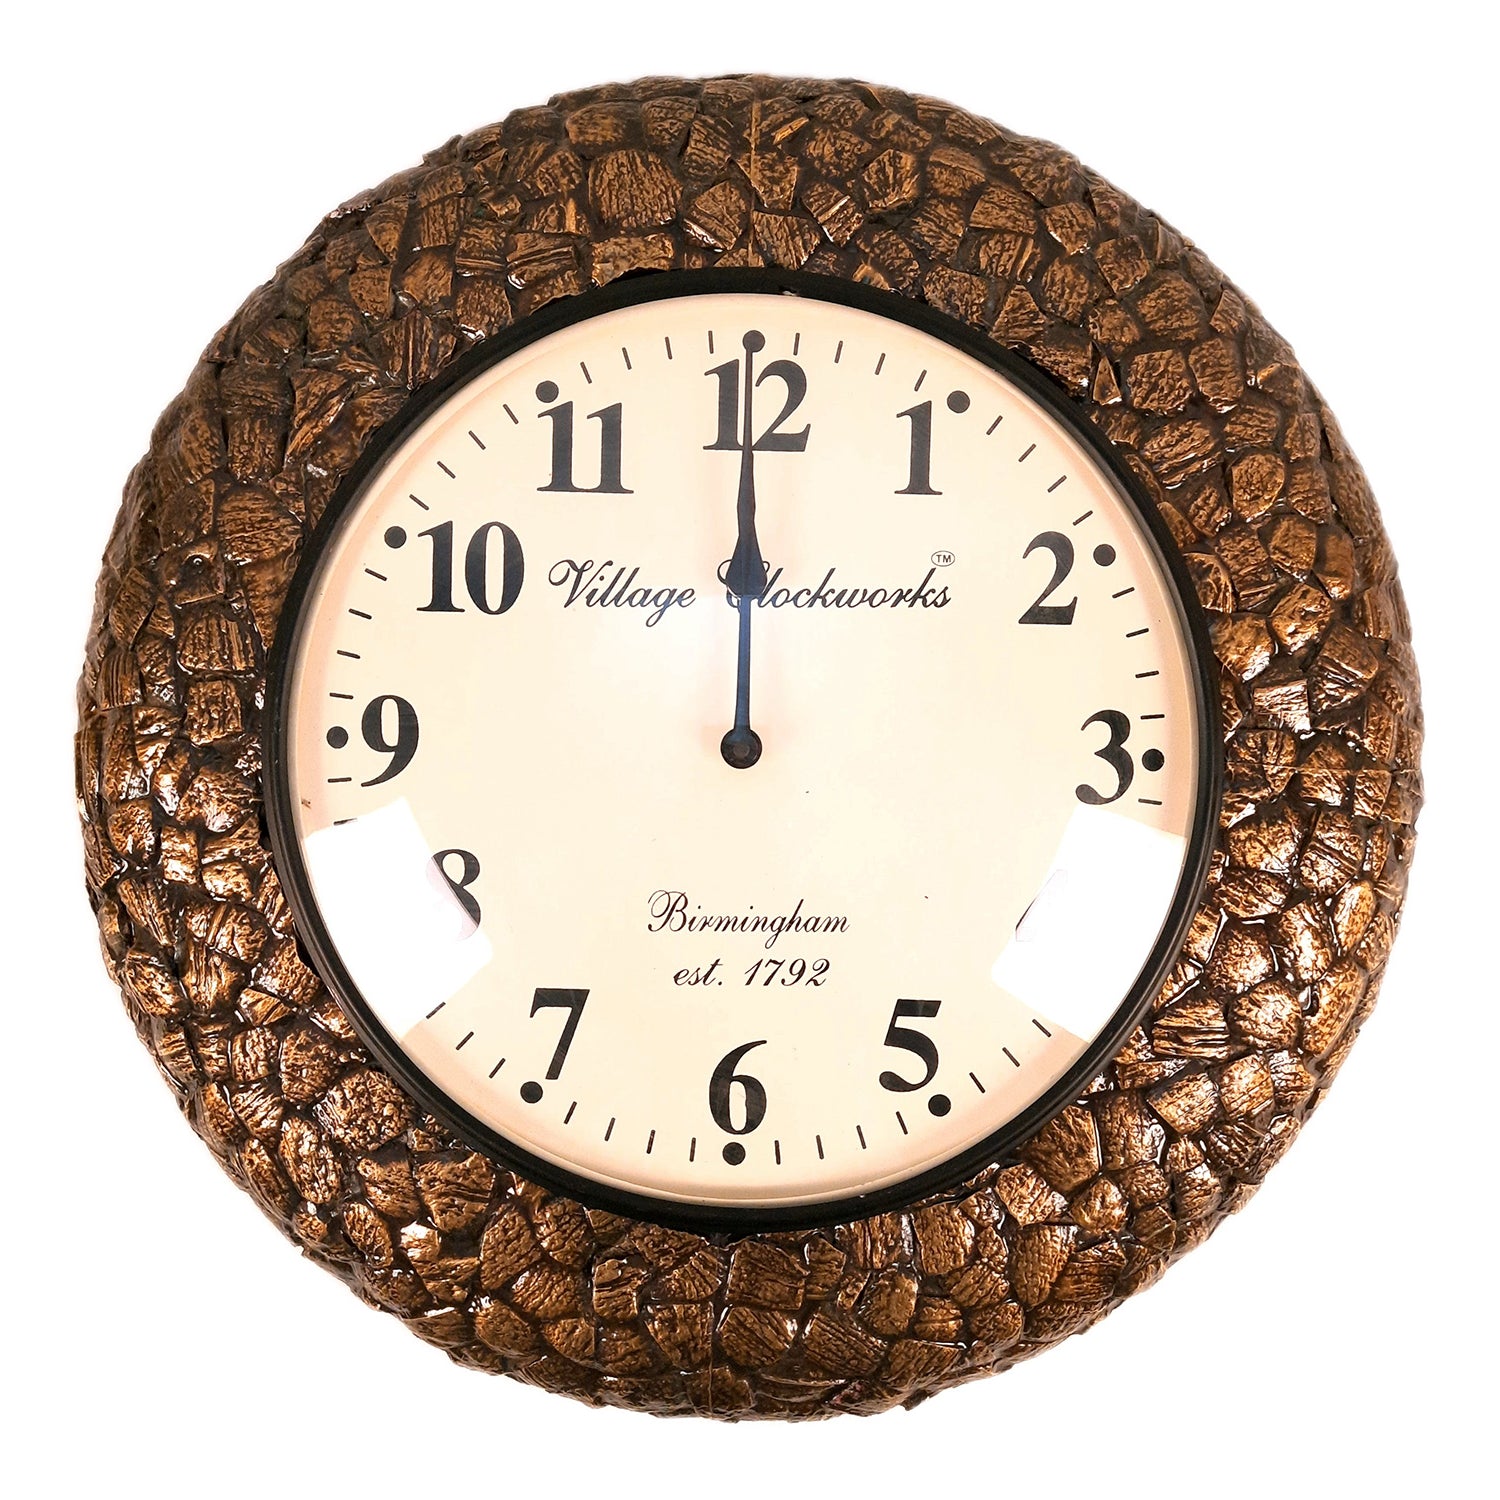 Wall Clock for Home | Wall Mount Analog Big Watch With Antique Brass Work - For Living Room, Bedroom, Hall, Office Decor & Gift - Apkamart